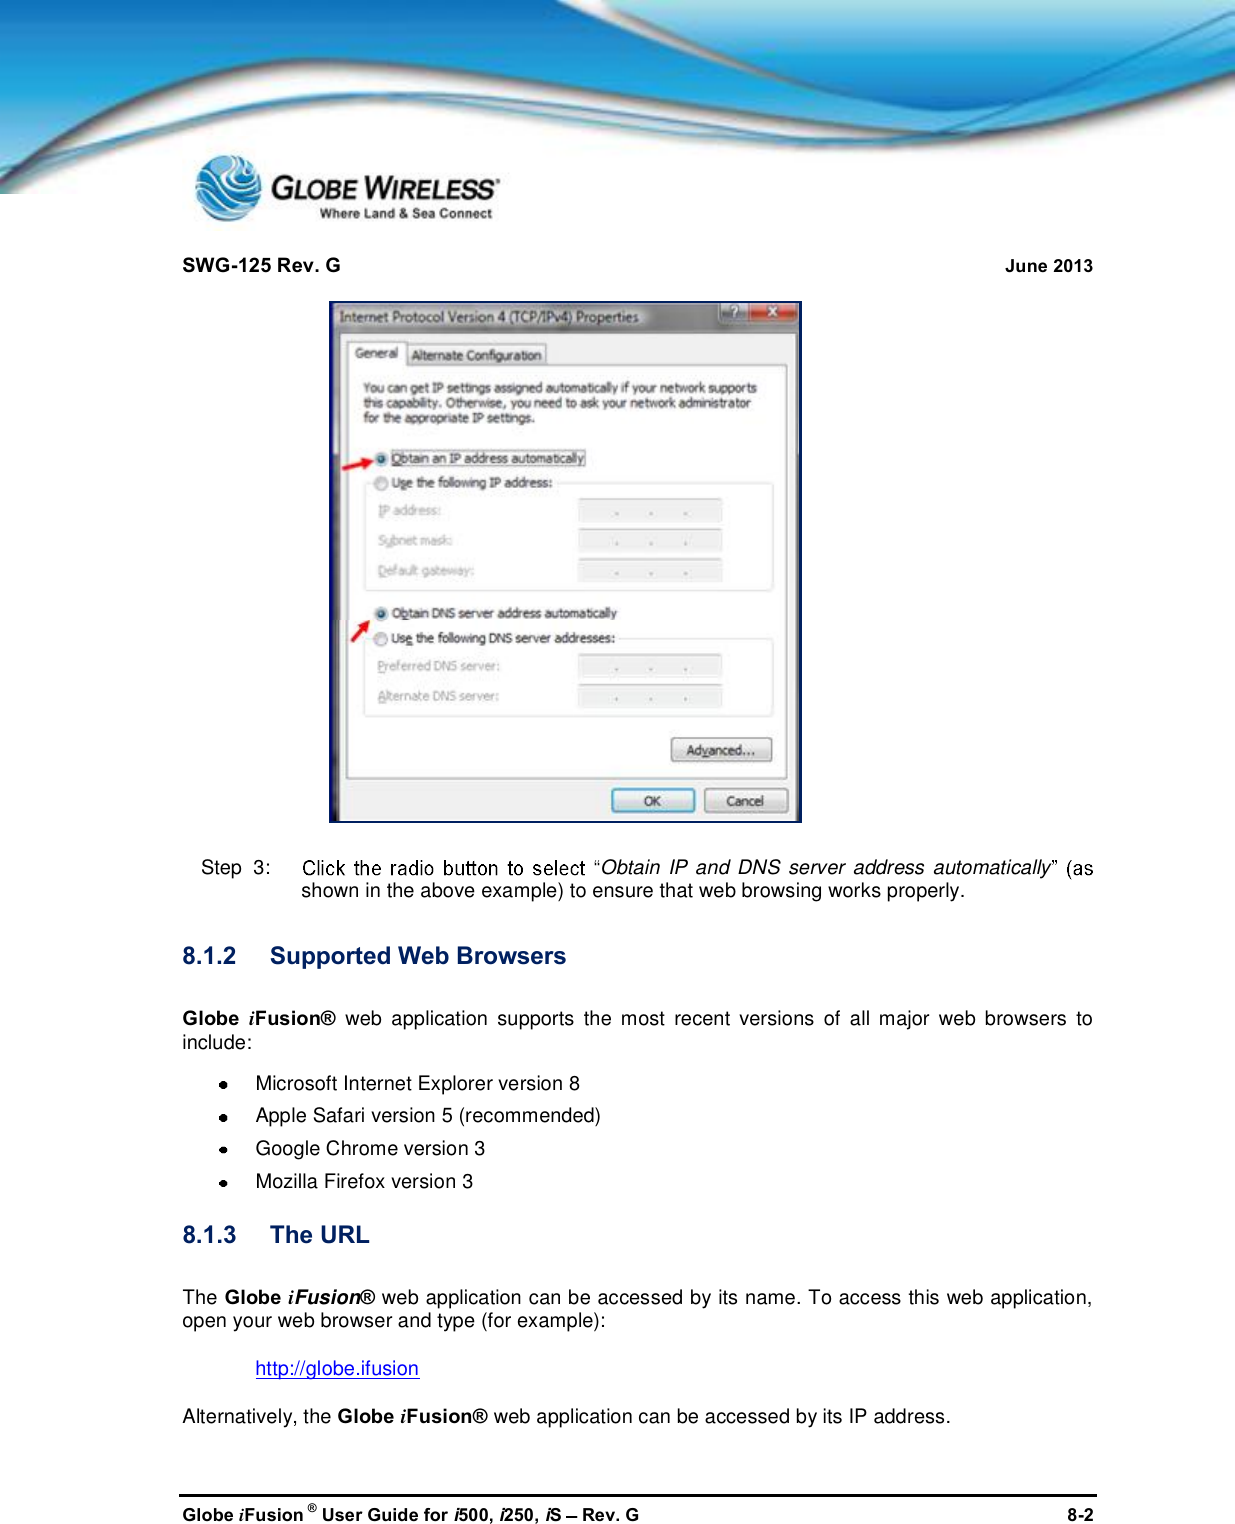 SWG-125 Rev. G June 2013Globe iFusion ®User Guide for i500, i250, iSRev. G 8-2Step  3: Obtain IP and DNS server address automaticallyshown in the above example) to ensure that web browsing works properly.8.1.2 Supported Web BrowsersGlobe iFusion® web application supports the most recent versions of all major web browsers toinclude:Microsoft Internet Explorer version 8Apple Safari version 5 (recommended)Google Chrome version 3Mozilla Firefox version 38.1.3 The URLThe Globe iFusion®web application can be accessed by its name. To access this web application,open your web browser and type (for example):http://globe.ifusionAlternatively, the Globe iFusion® web application can be accessed by its IP address.